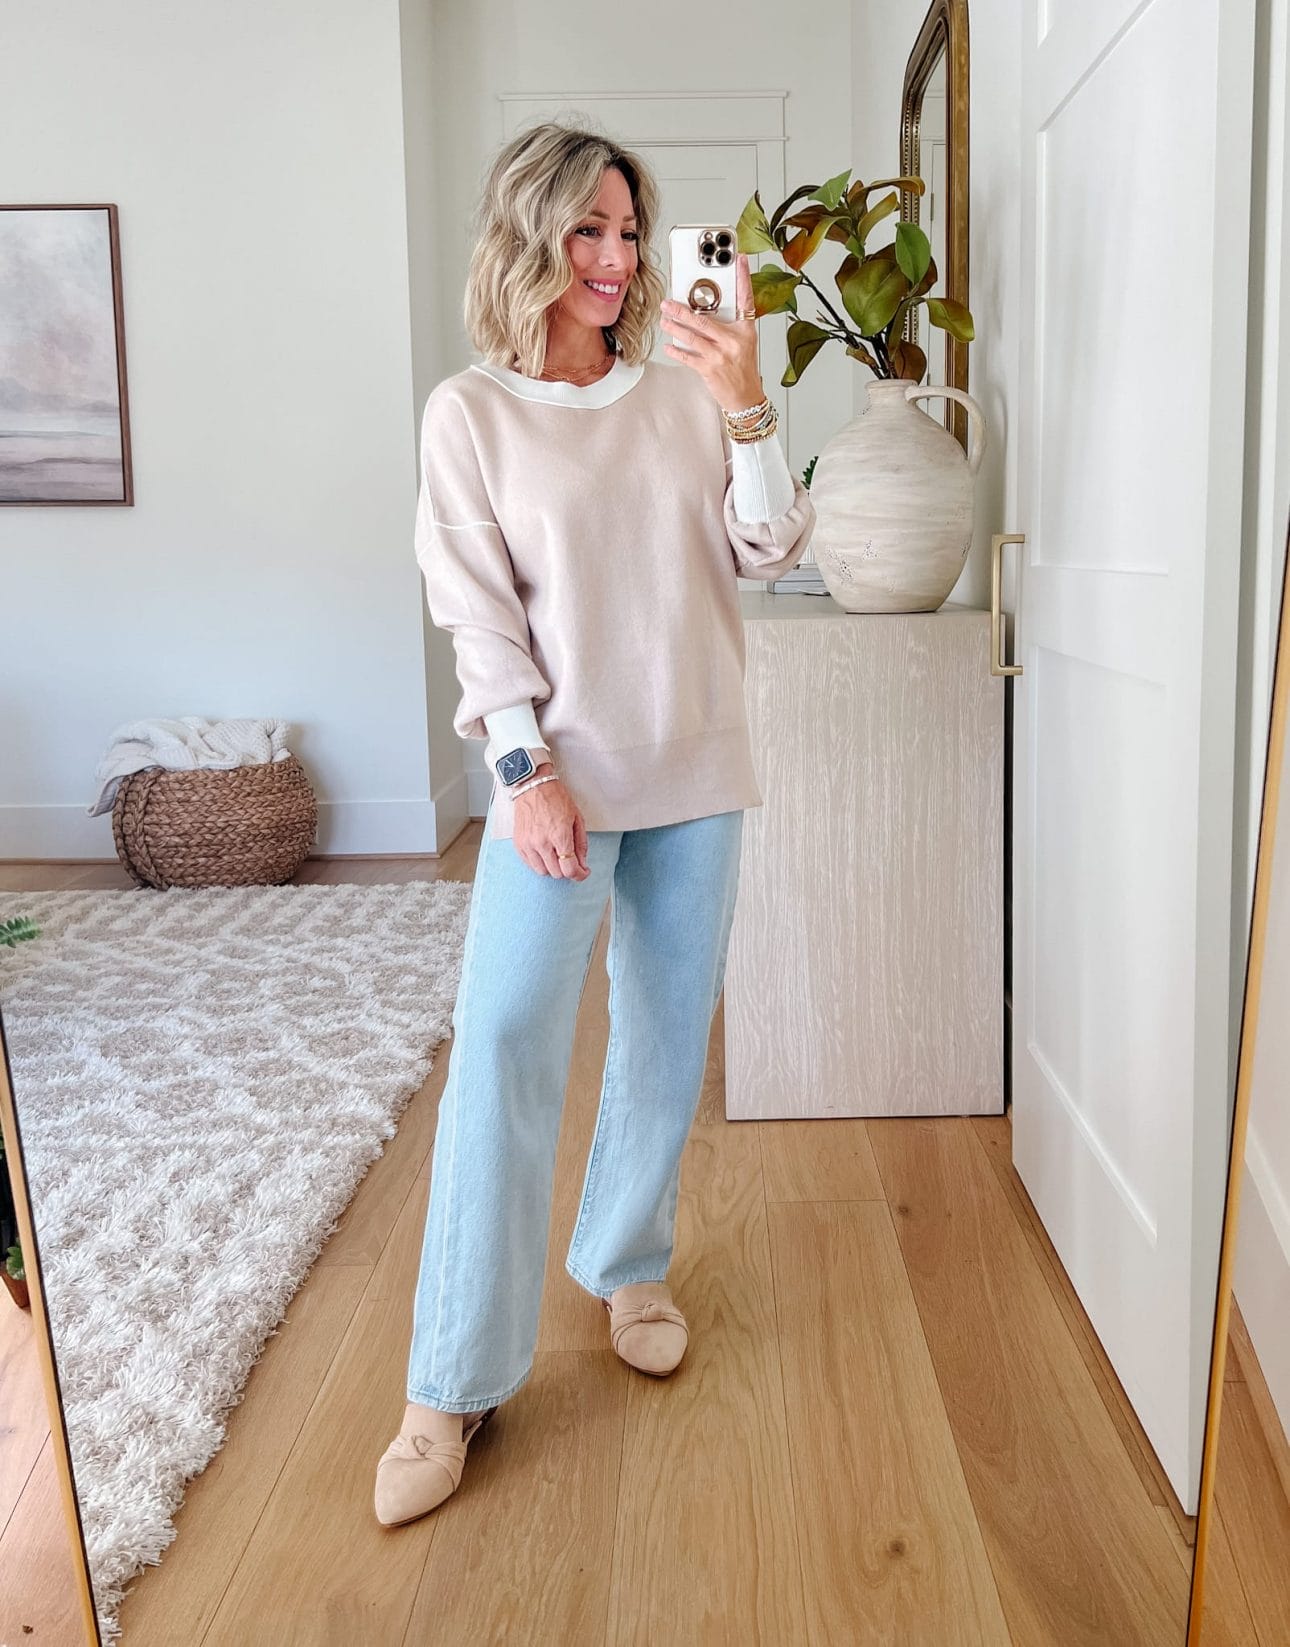 Crew Neck Pullover, Jeans, Mules 